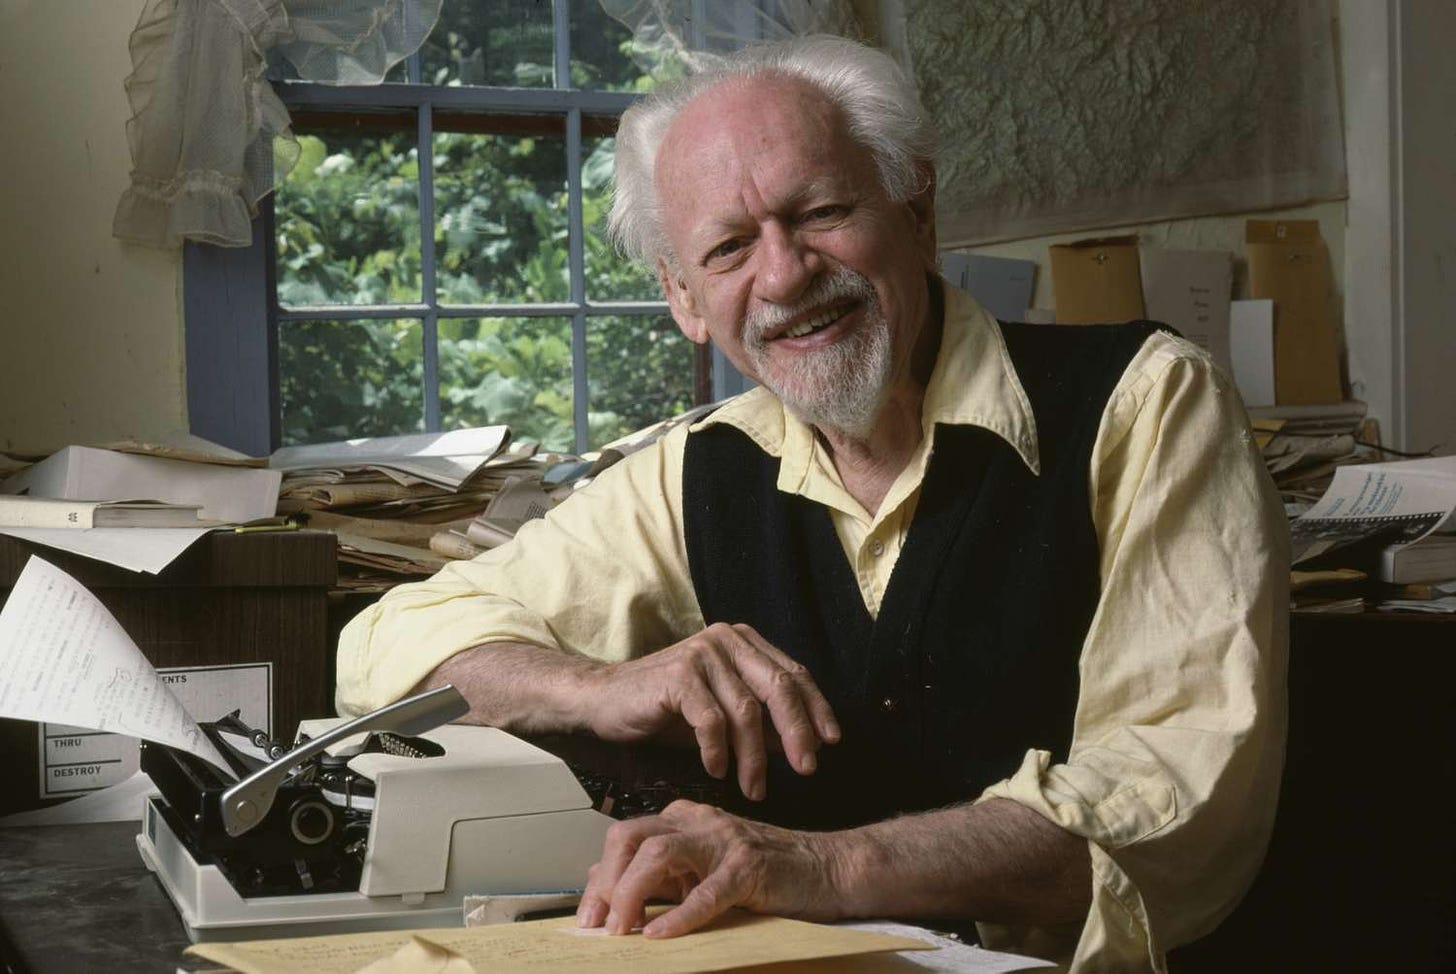 Kenneth Burke, an old man with white hair and a goatee, smiles somewhat awkwardly at the camera while sitting in front of a typewriter.